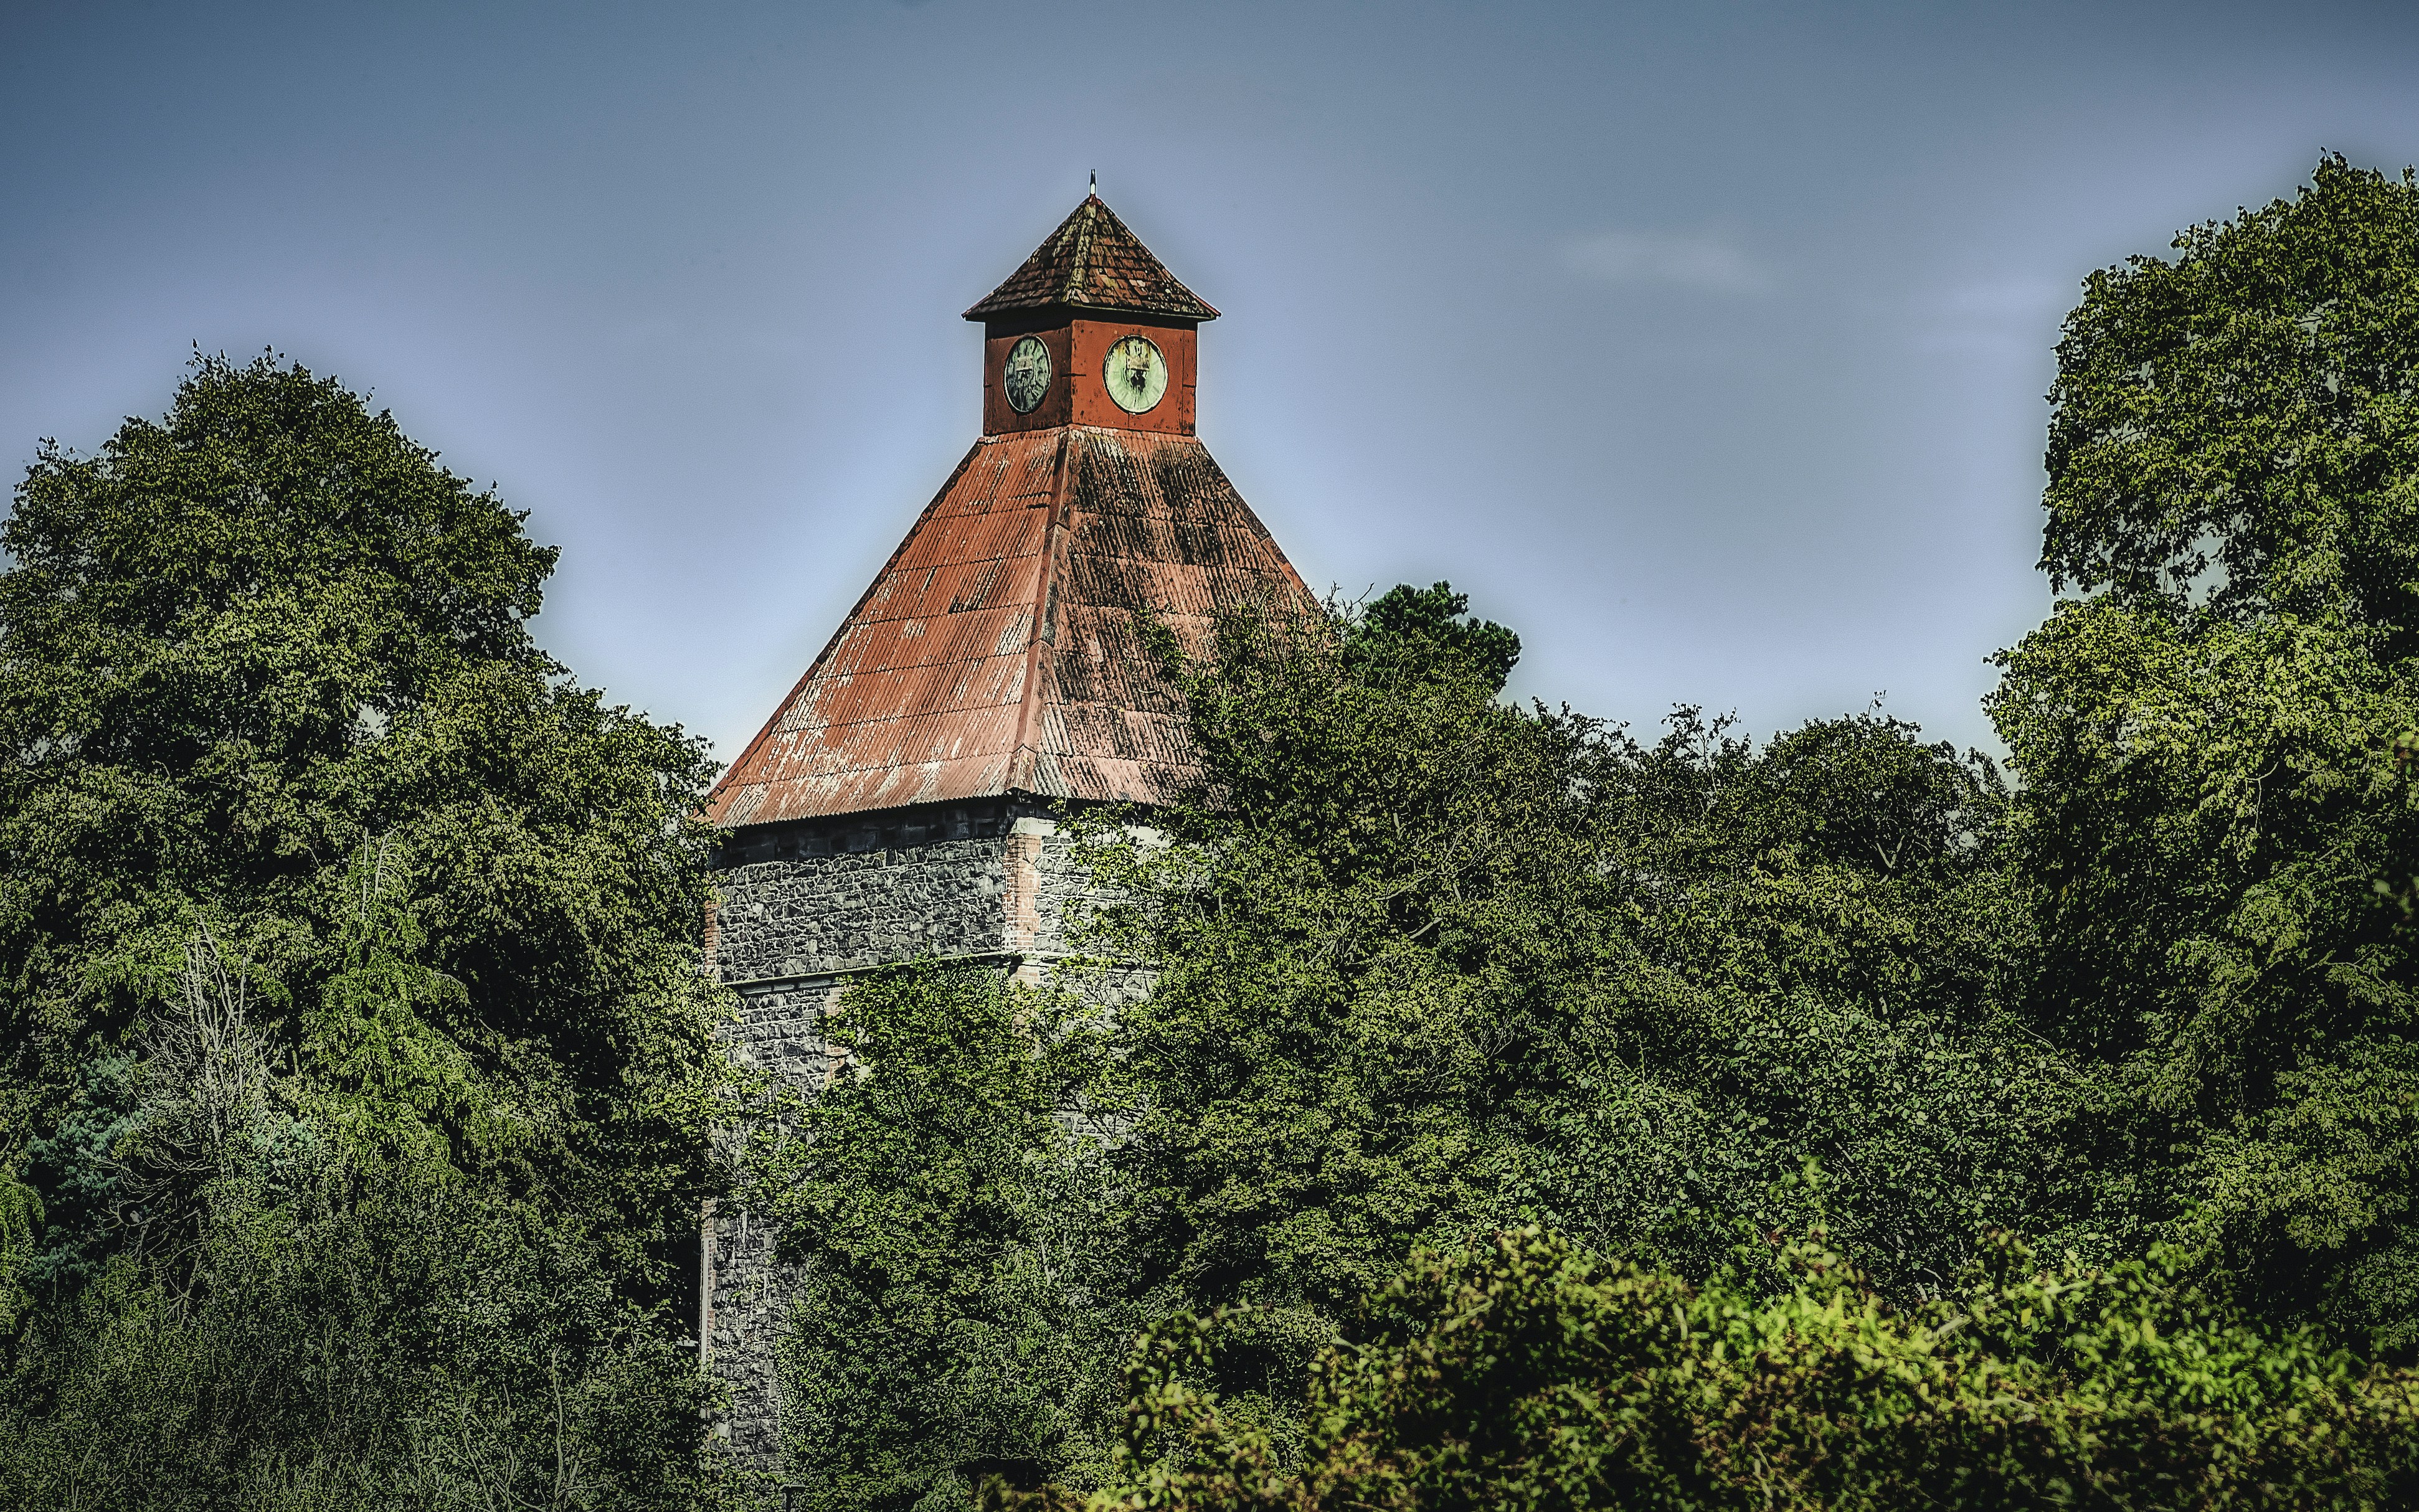 An old stone clock tower rises from the woods at Burn Equestrian Centre in South Belfast (Aug., 2019).